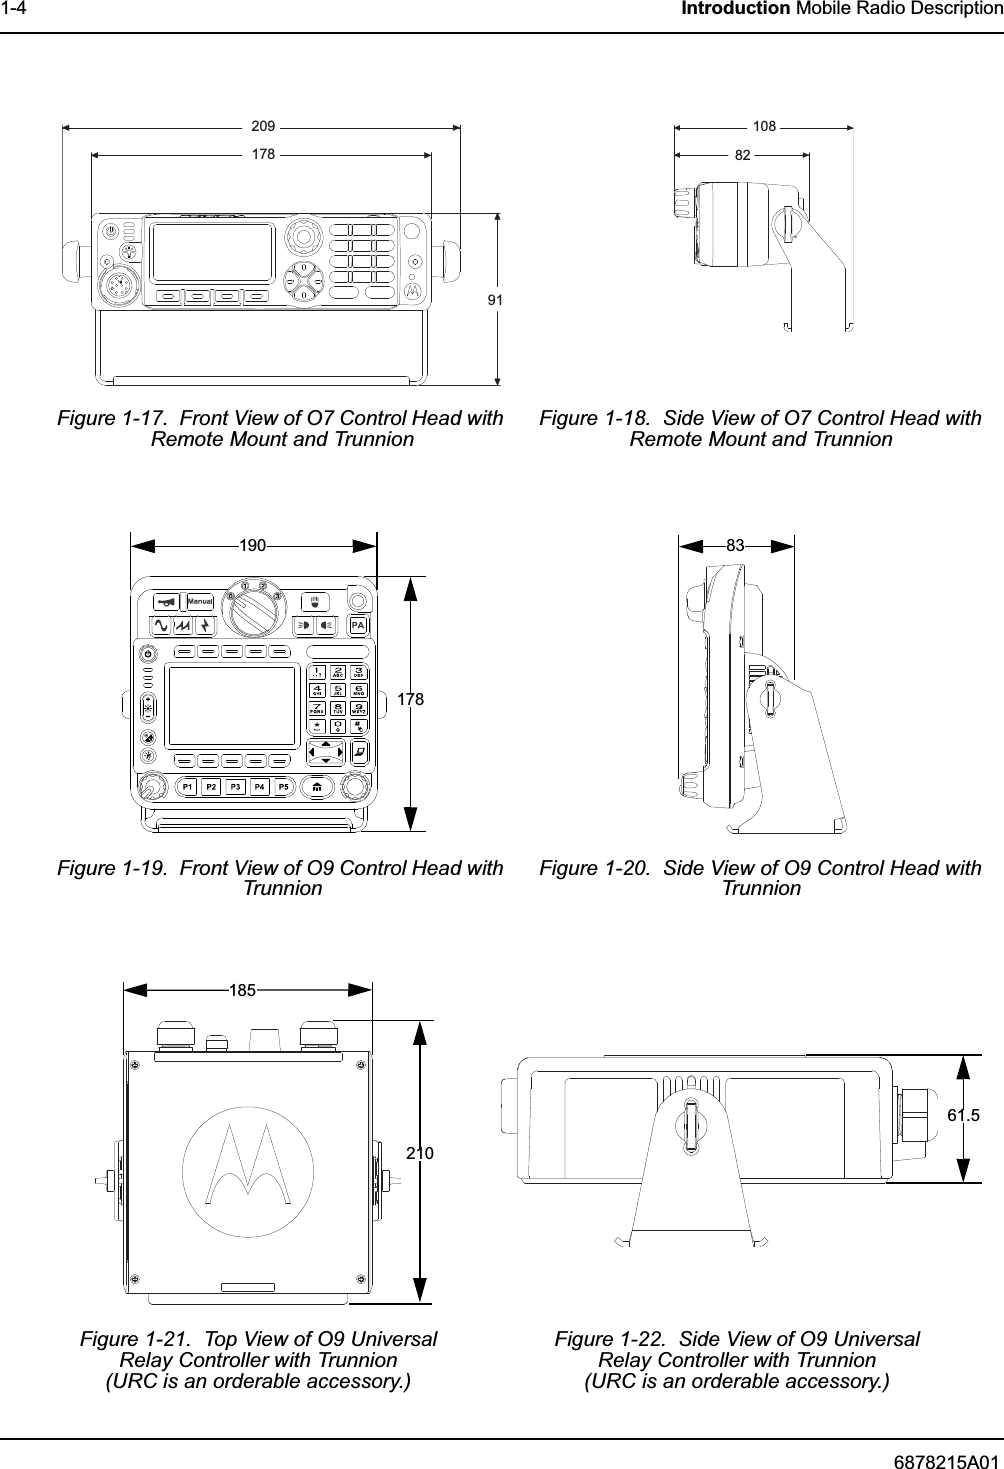 6878215A011-4 Introduction Mobile Radio DescriptionFigure 1-17.  Front View of O7 Control Head with Remote Mount and TrunnionFigure 1-18.  Side View of O7 Control Head with Remote Mount and TrunnionFigure 1-19.  Front View of O9 Control Head with TrunnionFigure 1-20.  Side View of O9 Control Head with TrunnionFigure 1-21.  Top View of O9 UniversalRelay Controller with Trunnion(URC is an orderable accessory.)Figure 1-22.  Side View of O9 UniversalRelay Controller with Trunnion(URC is an orderable accessory.)2091789110882178190 8318521061.5